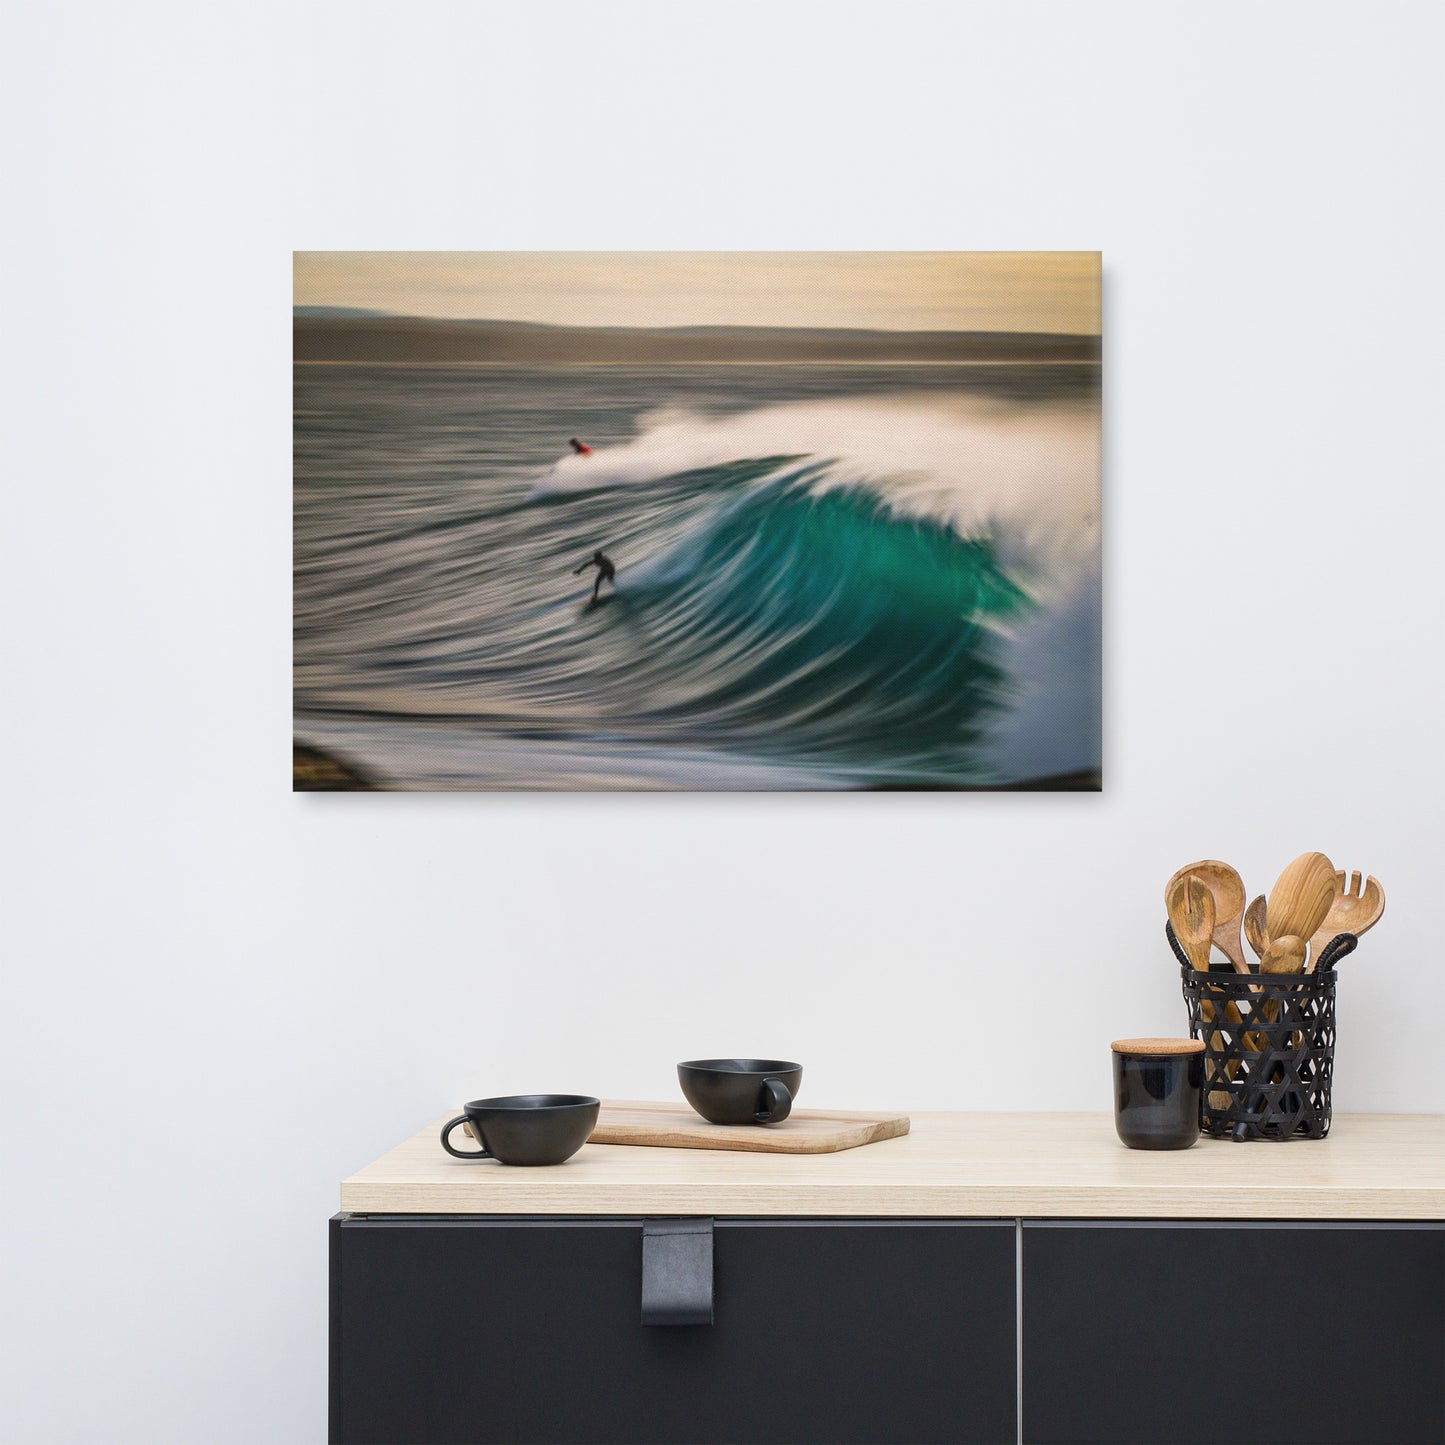 A Surfer's Dance with Light Lifestyle / Abstract / Landscape Photograph Canvas Wall Art Print